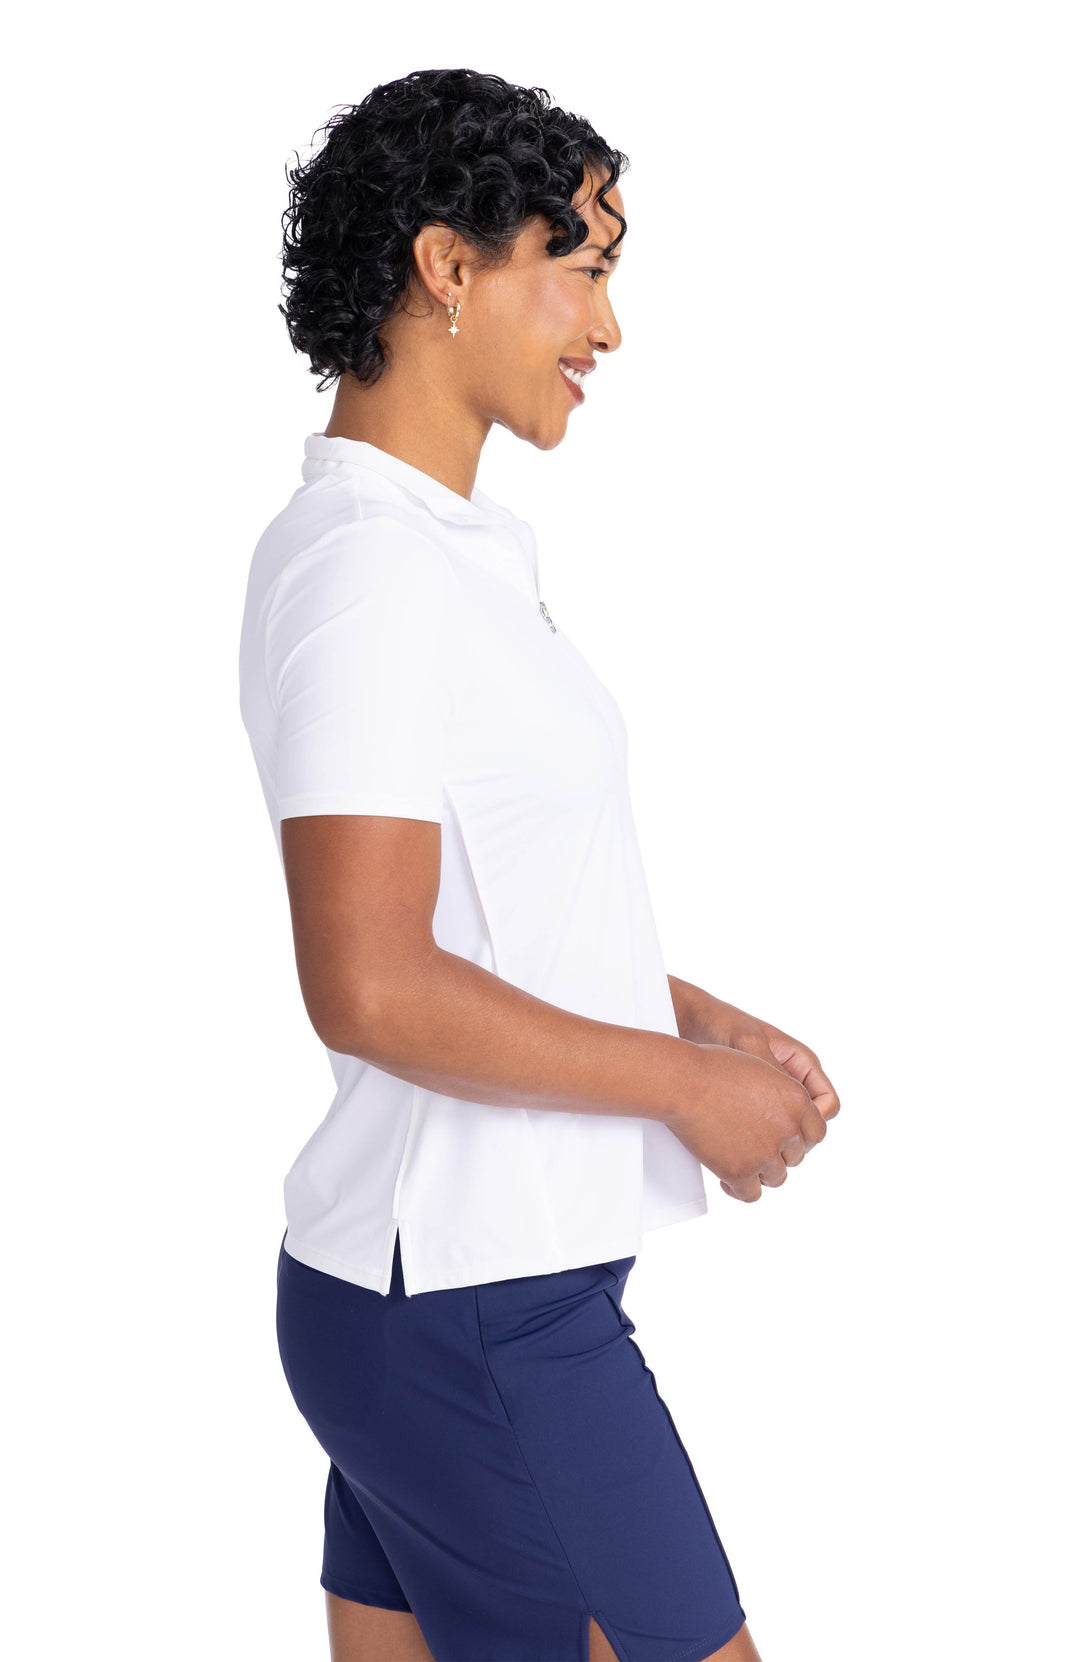 women smiling wearing keep it covered shortsleeve top in white facing right